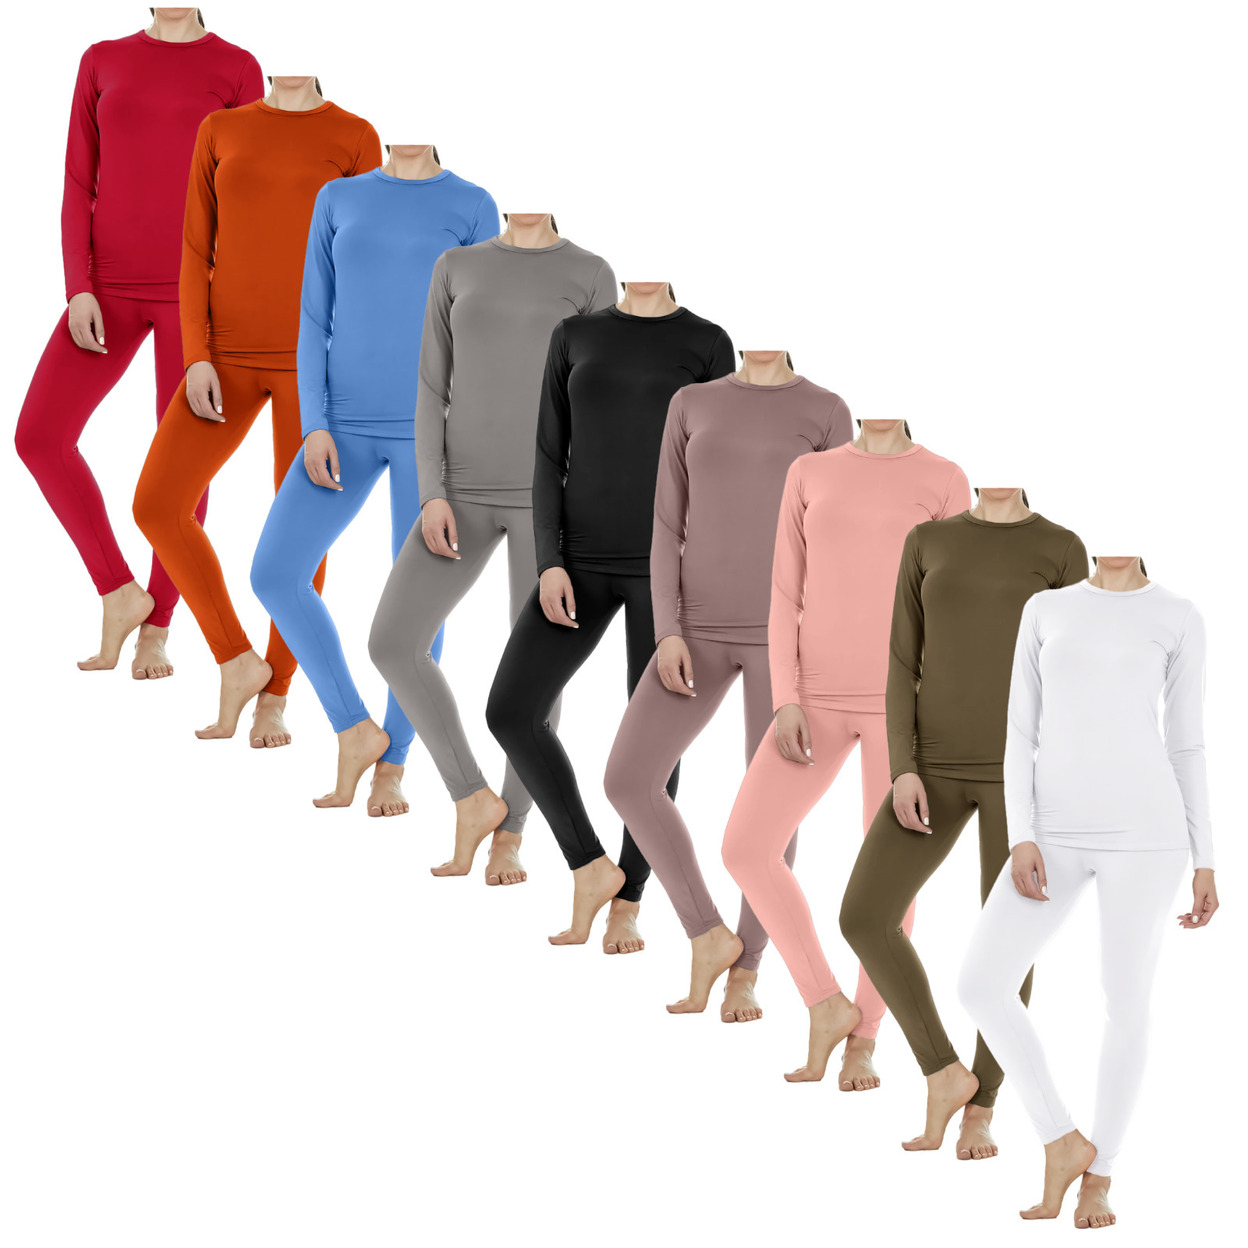 2-Set: Women's Fleece Lined Winter Warm Soft Thermal Sets For Cold Weather - Black&blue, Small